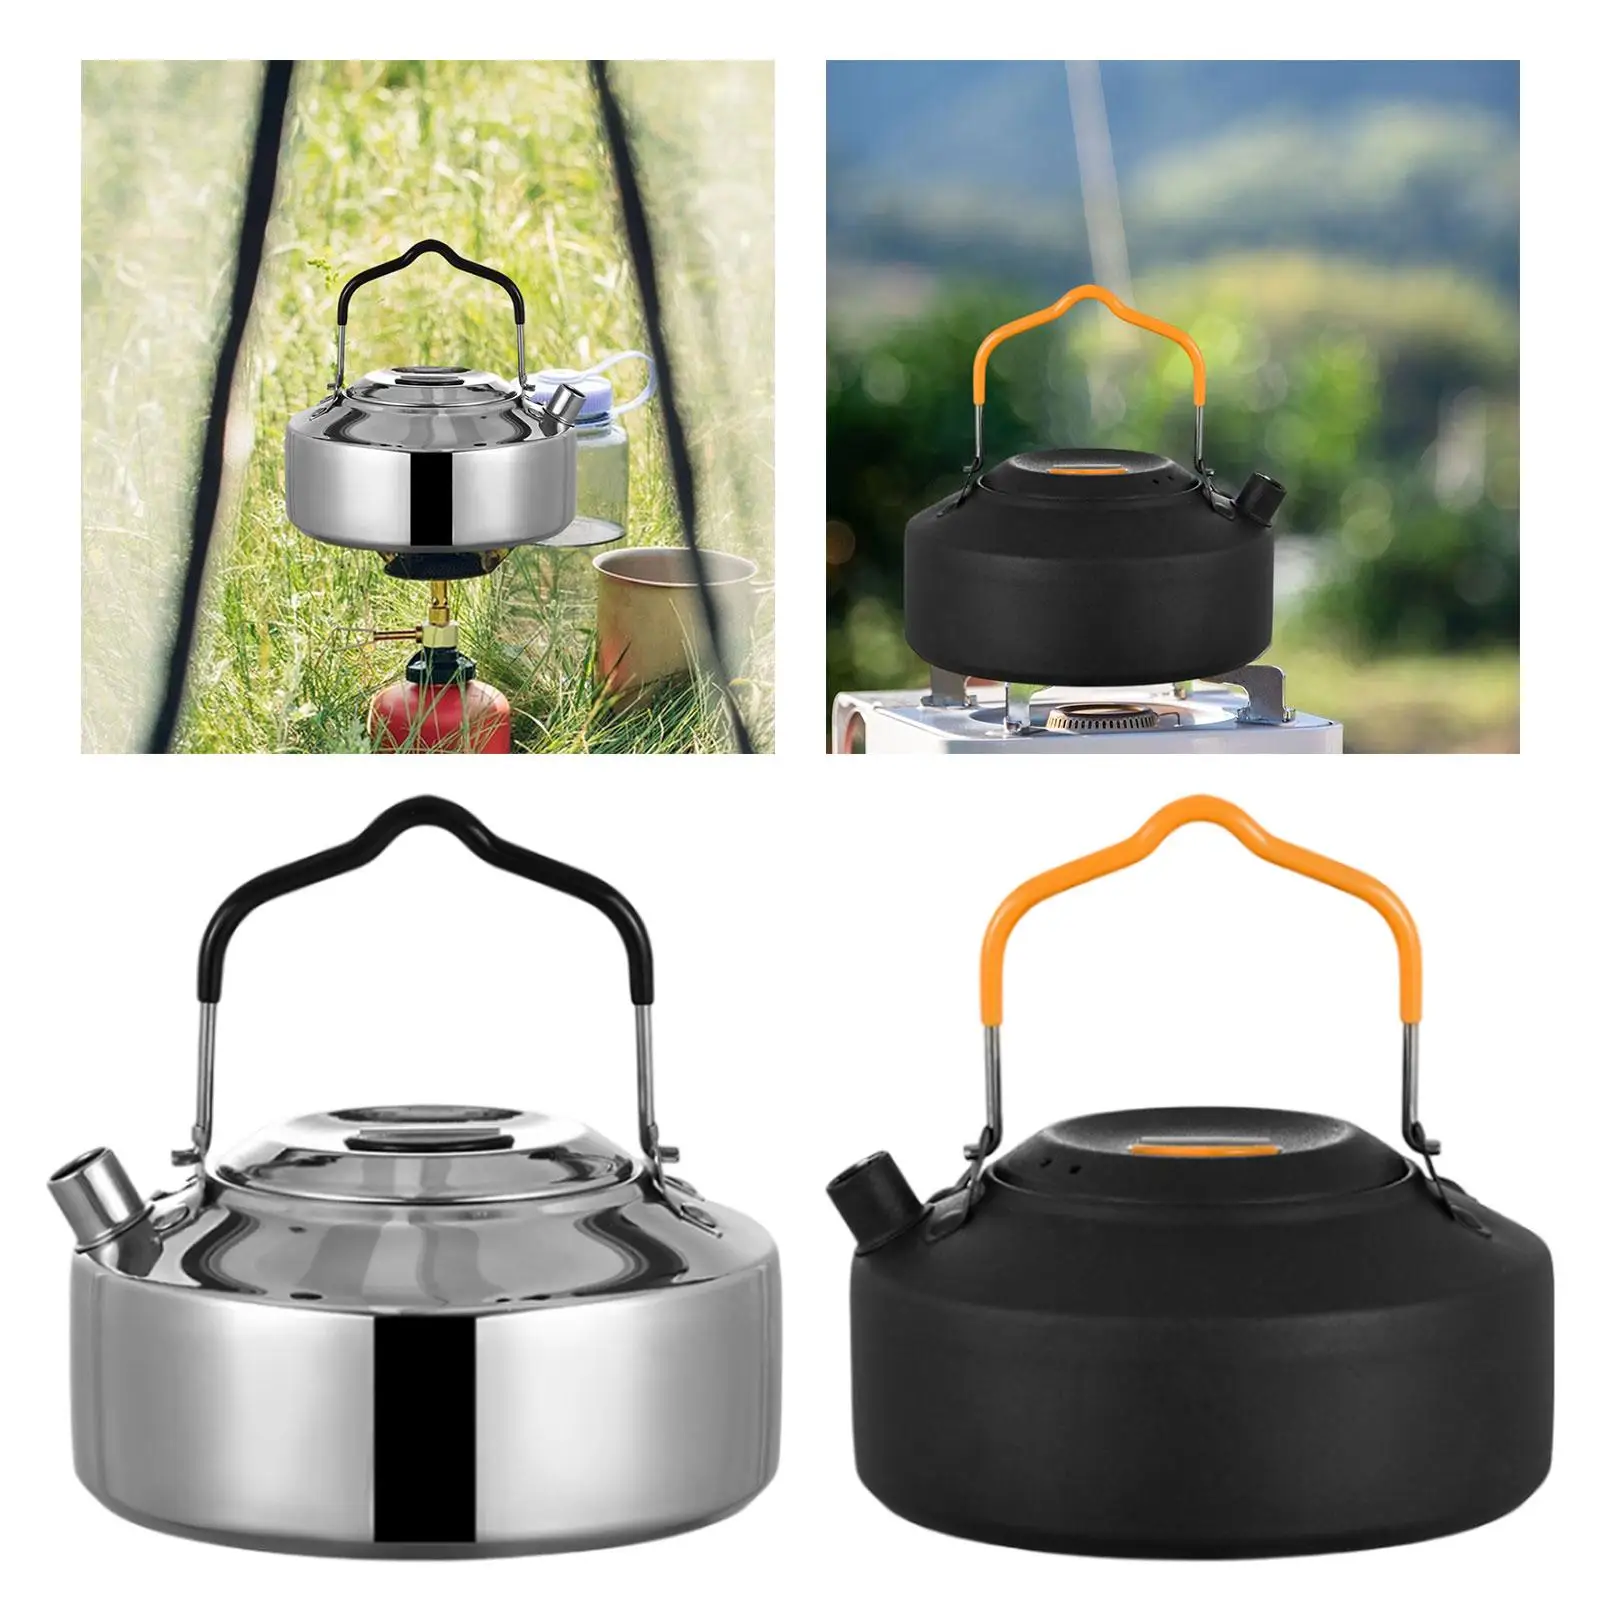 1L Camping Kettle Insulated Handle Teapot Stainless Steel Tea Kettle for Cooking Hiking Mountaineering Backpacking Travel